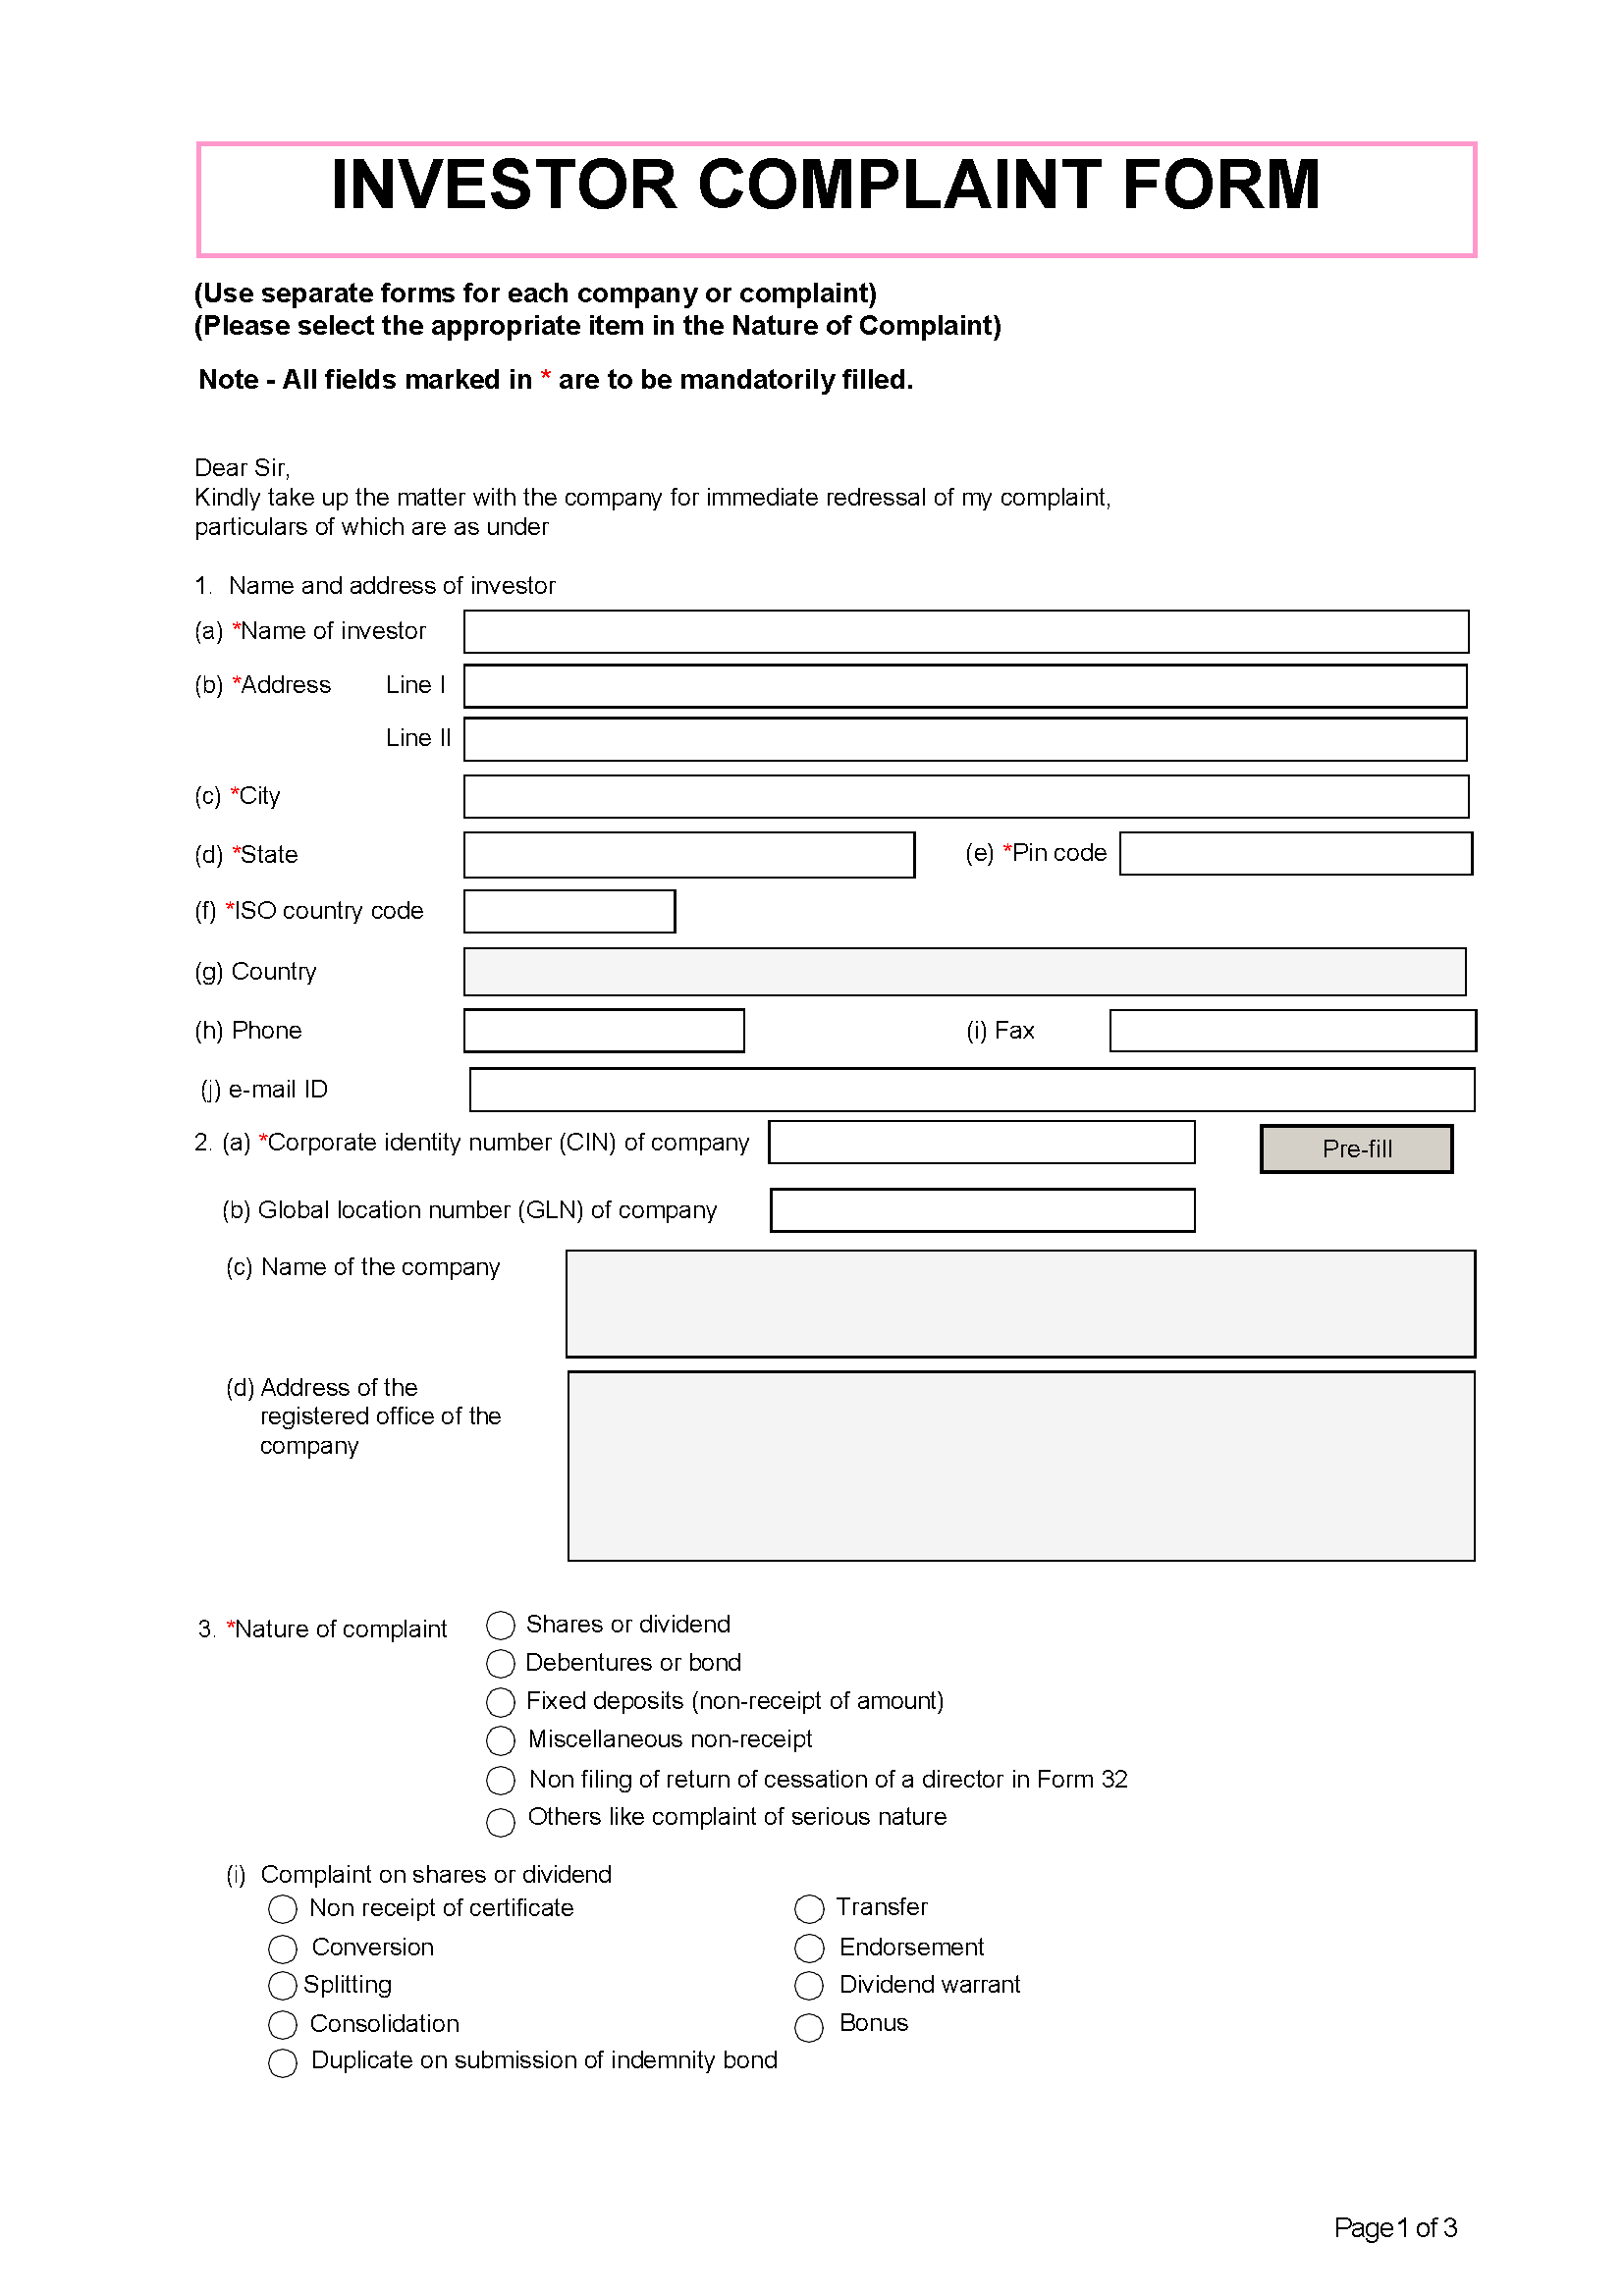 70 - Form for Filing Complaint(S) Against the Company (Investor Complaint Form)-converted